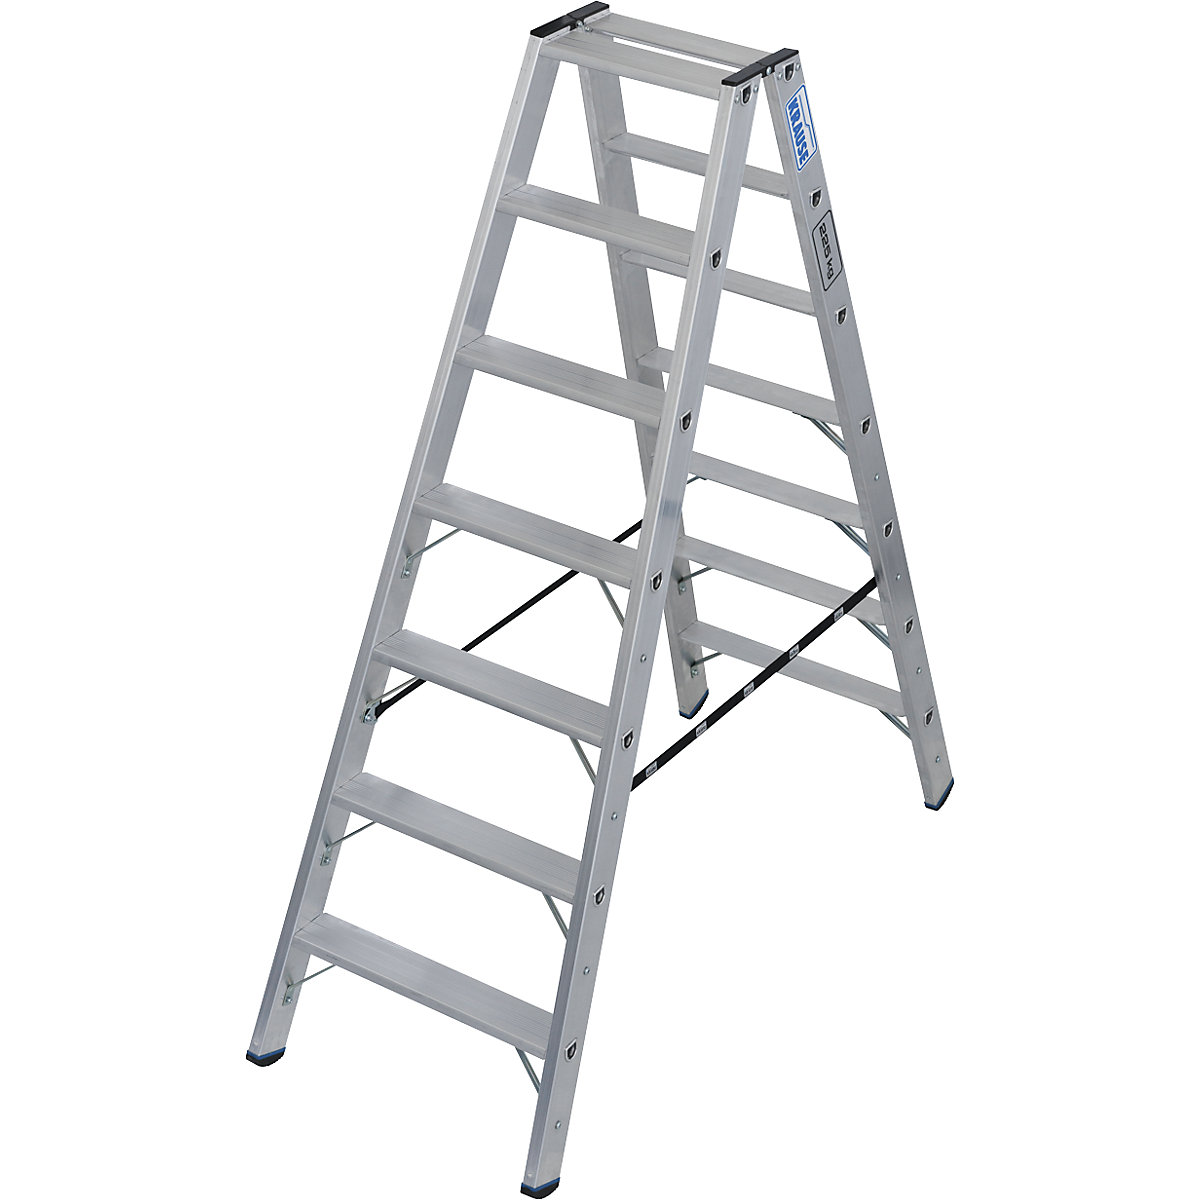 Heavy duty step ladder – KRAUSE, double sided access, up to 225 kg, 2x7 steps-5